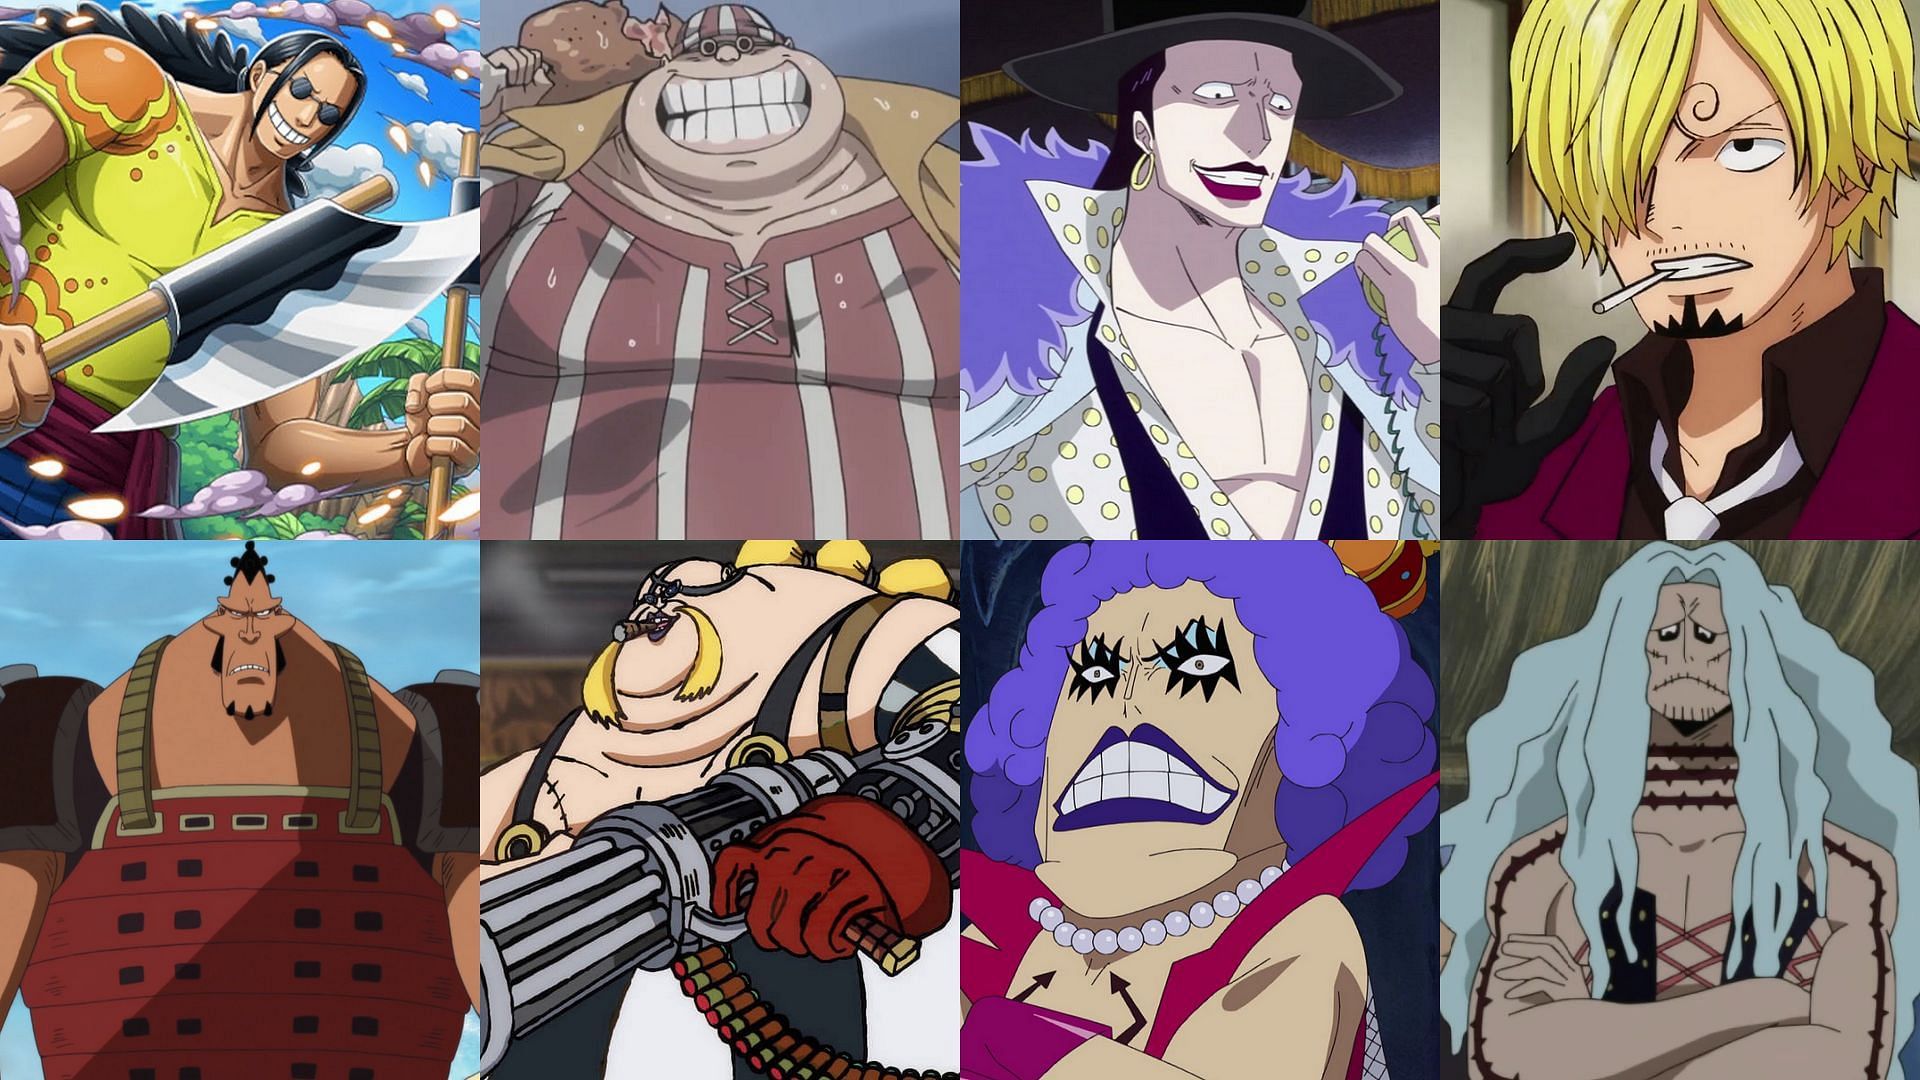 The 10 strongest lefthand men in One Piece ranked